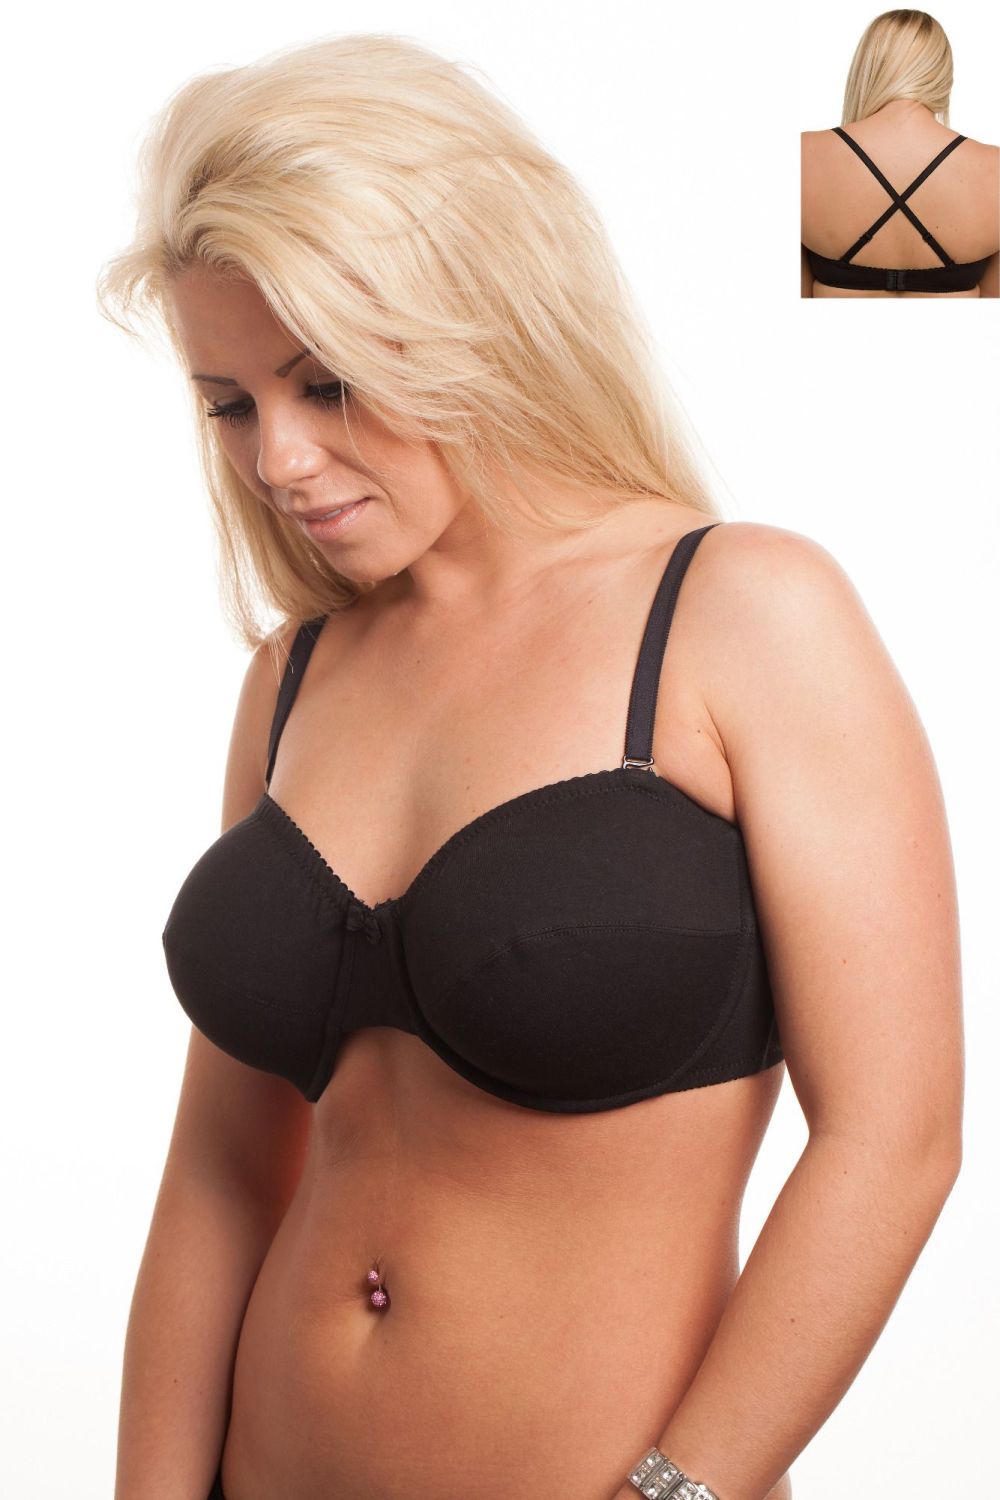 MW295 - 50 COTTON Strapless Bras - only £3.50 Each